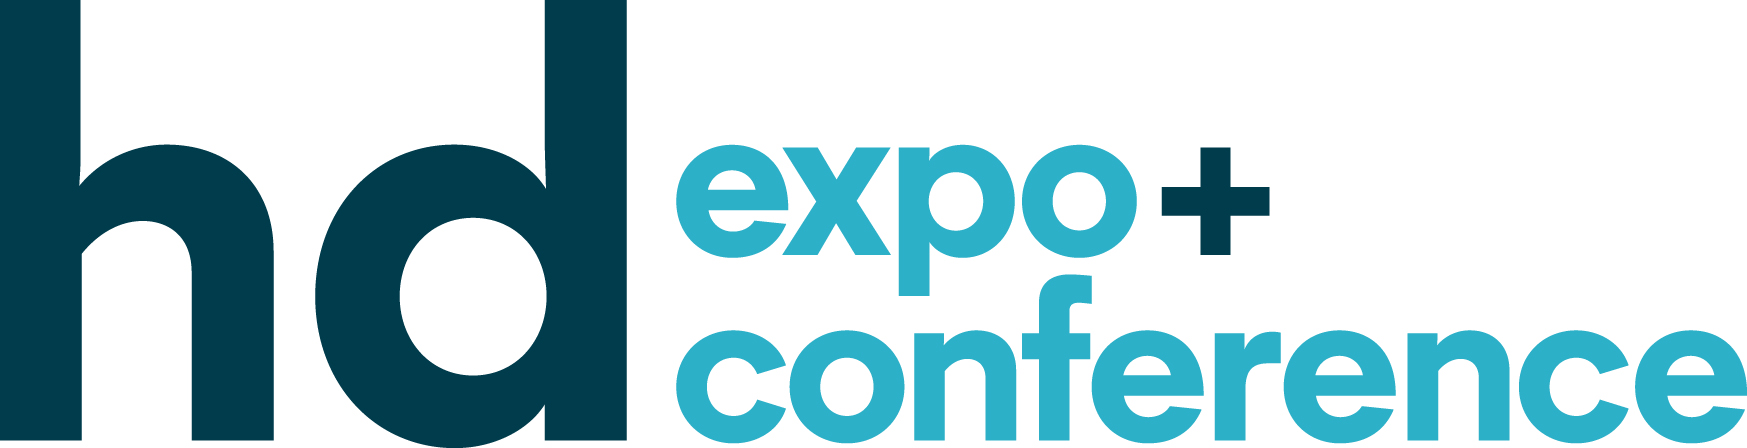 HD Expo + Conference 